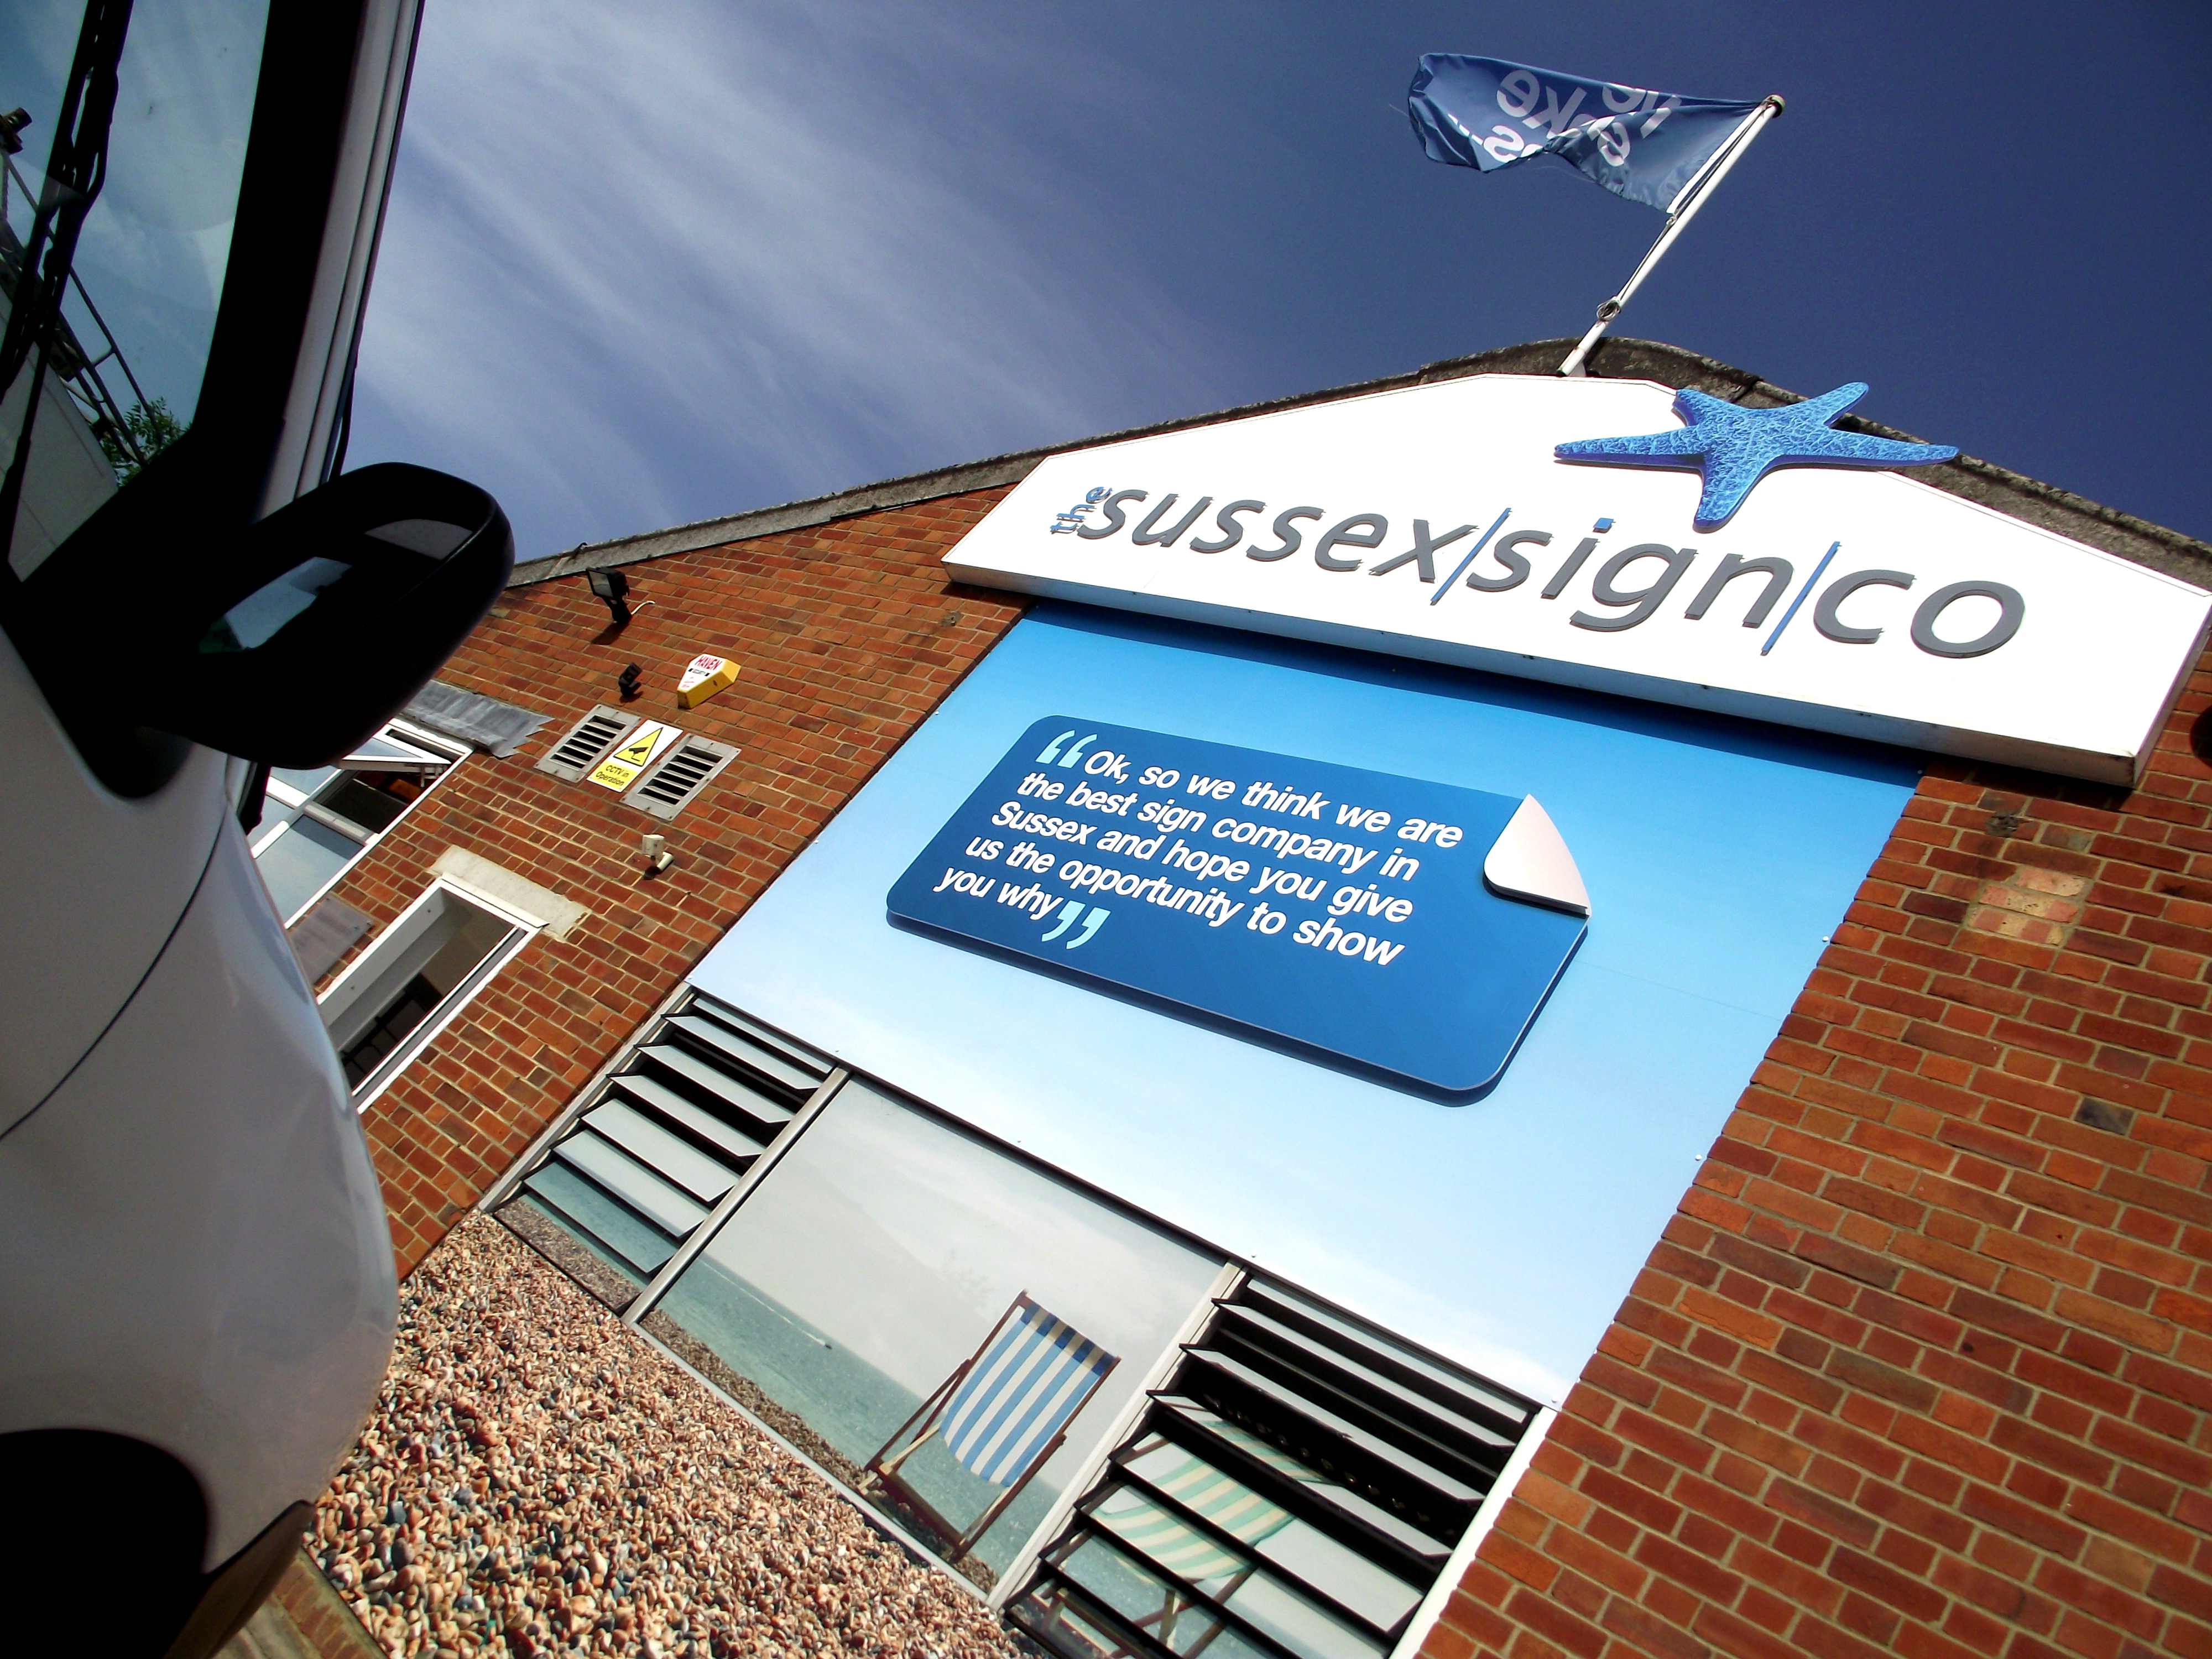 The Sussex Sign Co Image 2